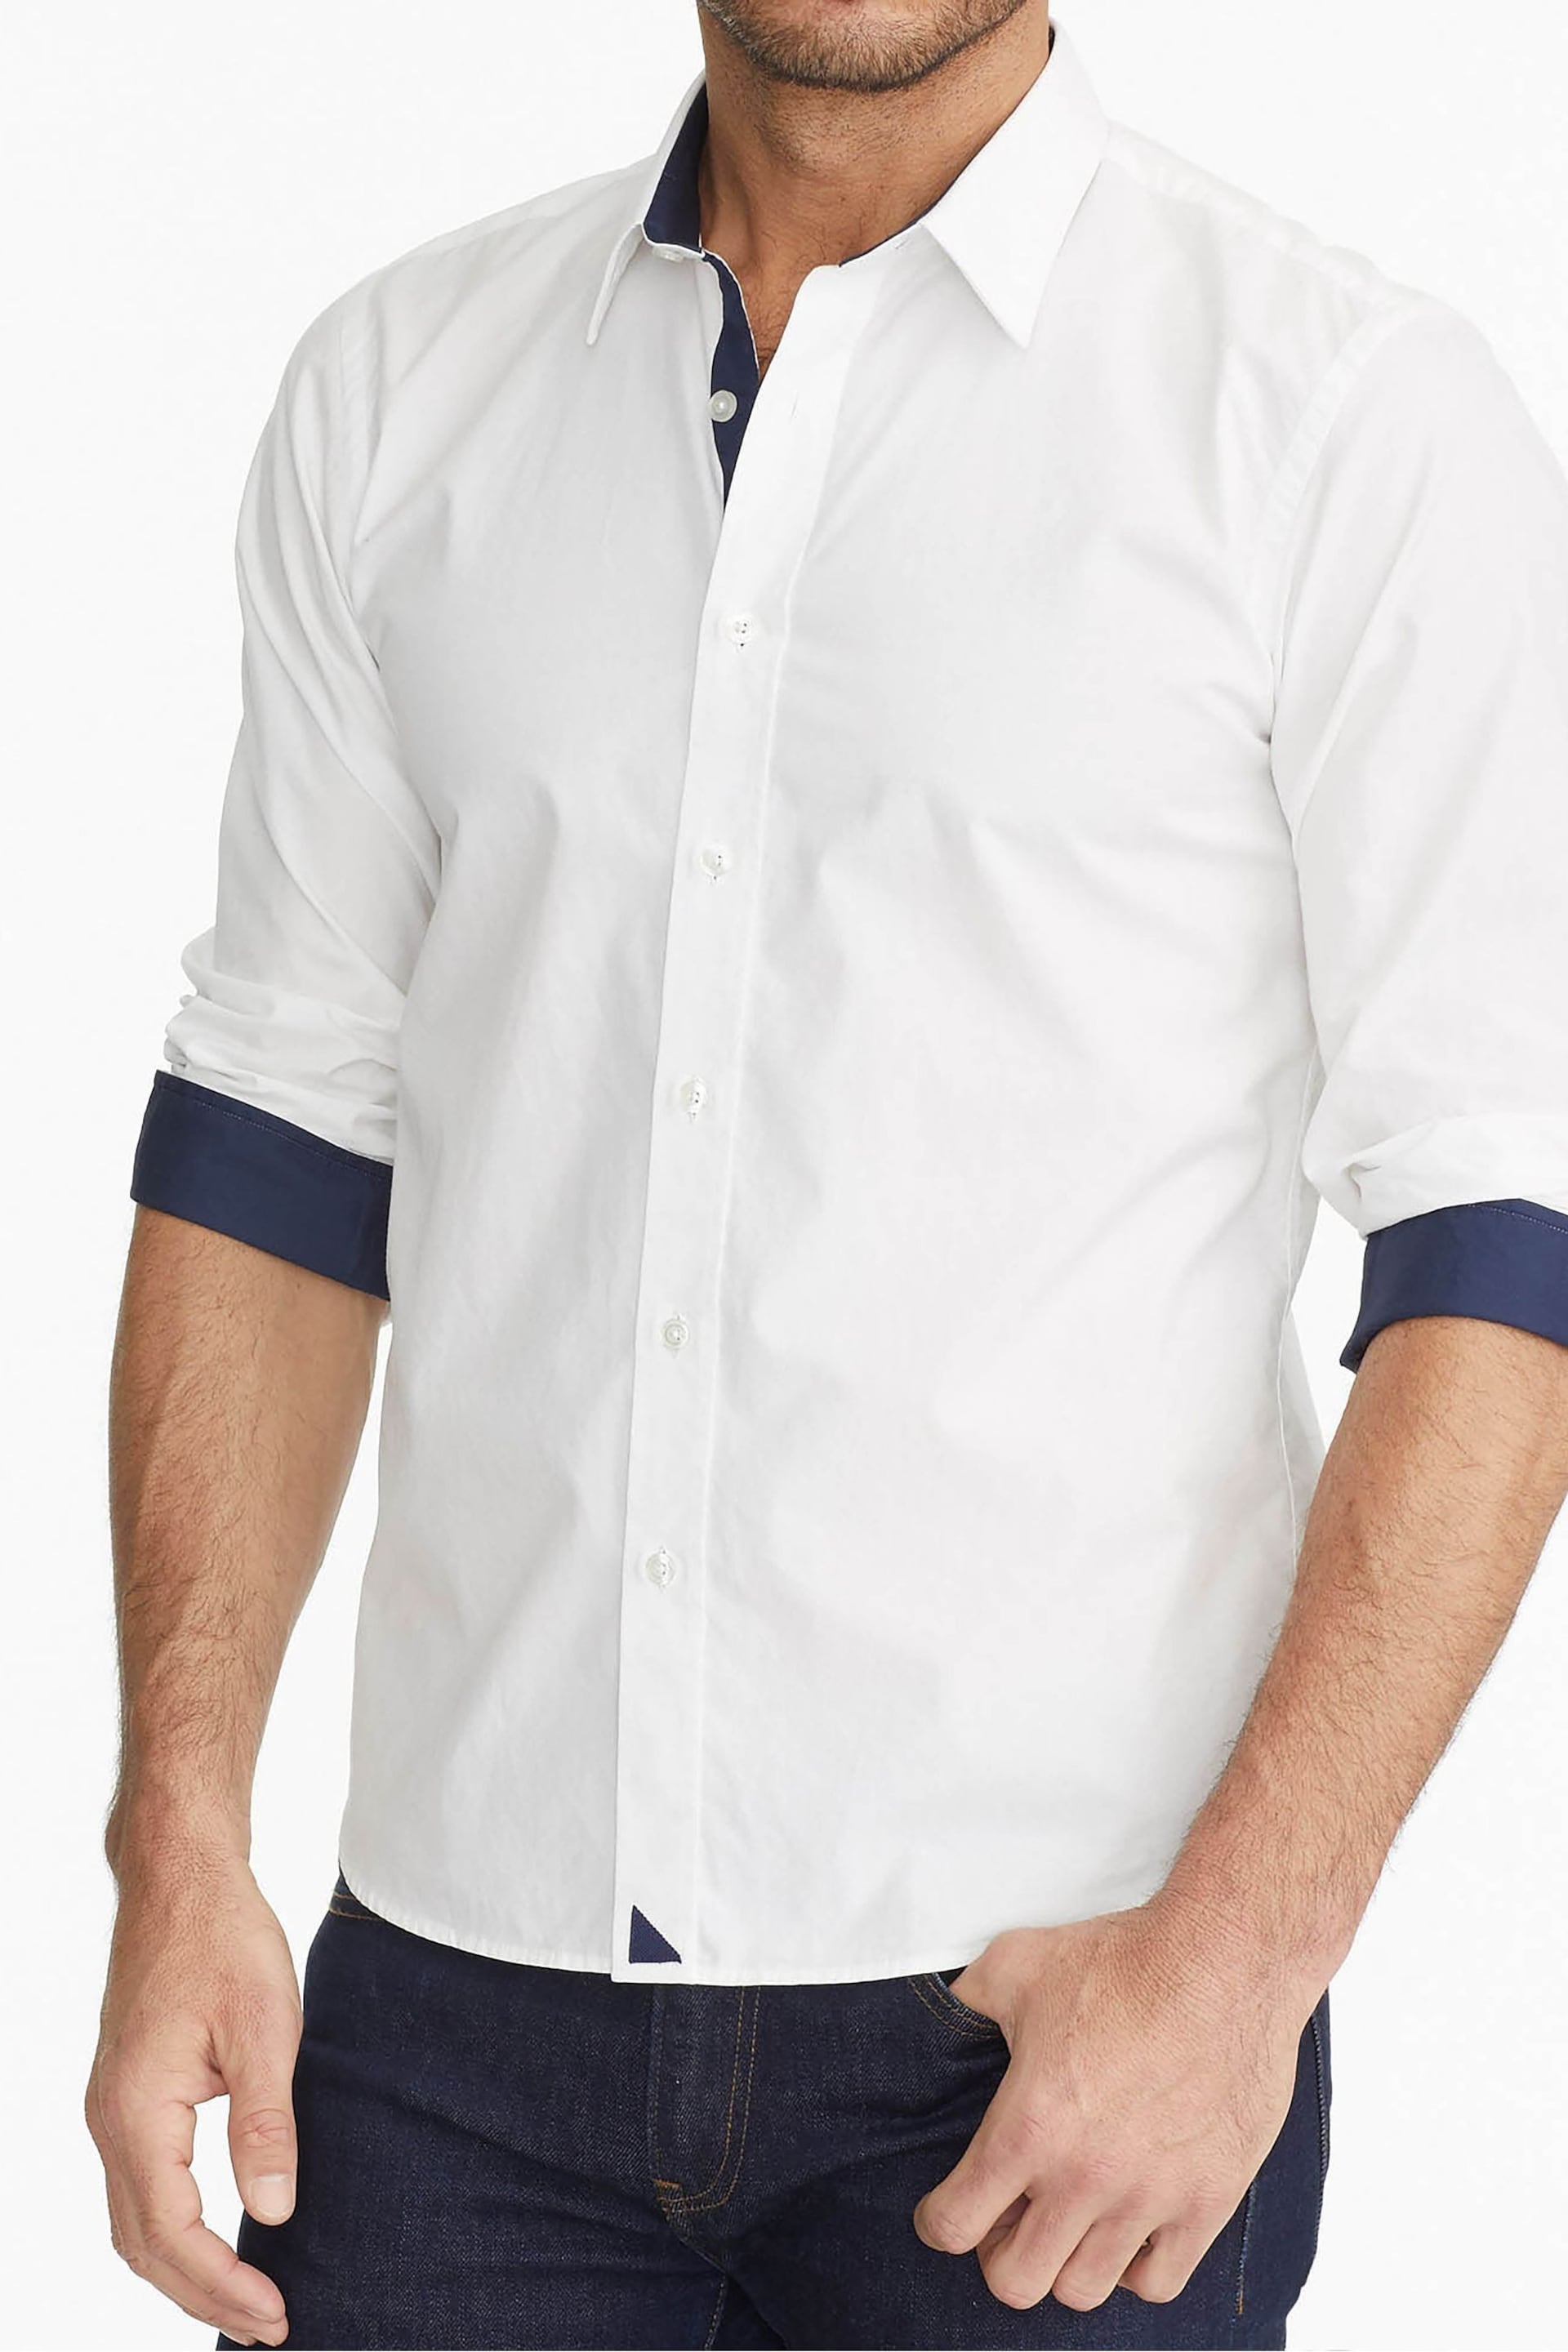 UNTUCKit White/Blue Wrinkle-Free Relaxed Fit Las Cases Special Shirt - Image 3 of 4